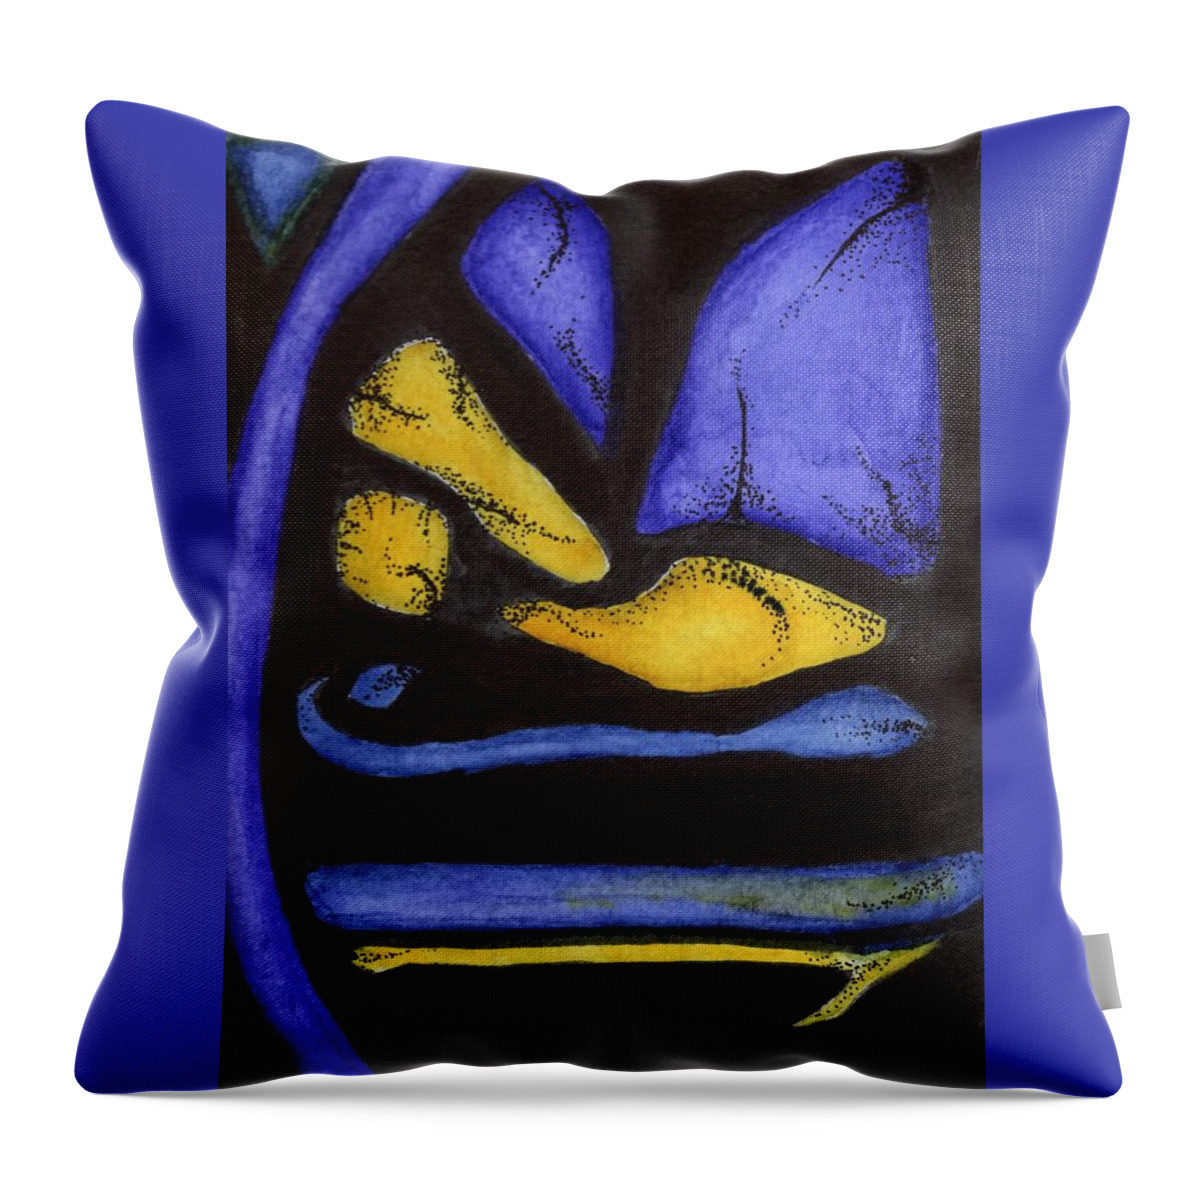 Purple Throw Pillow featuring the painting Purple Emperor by Misty Morehead